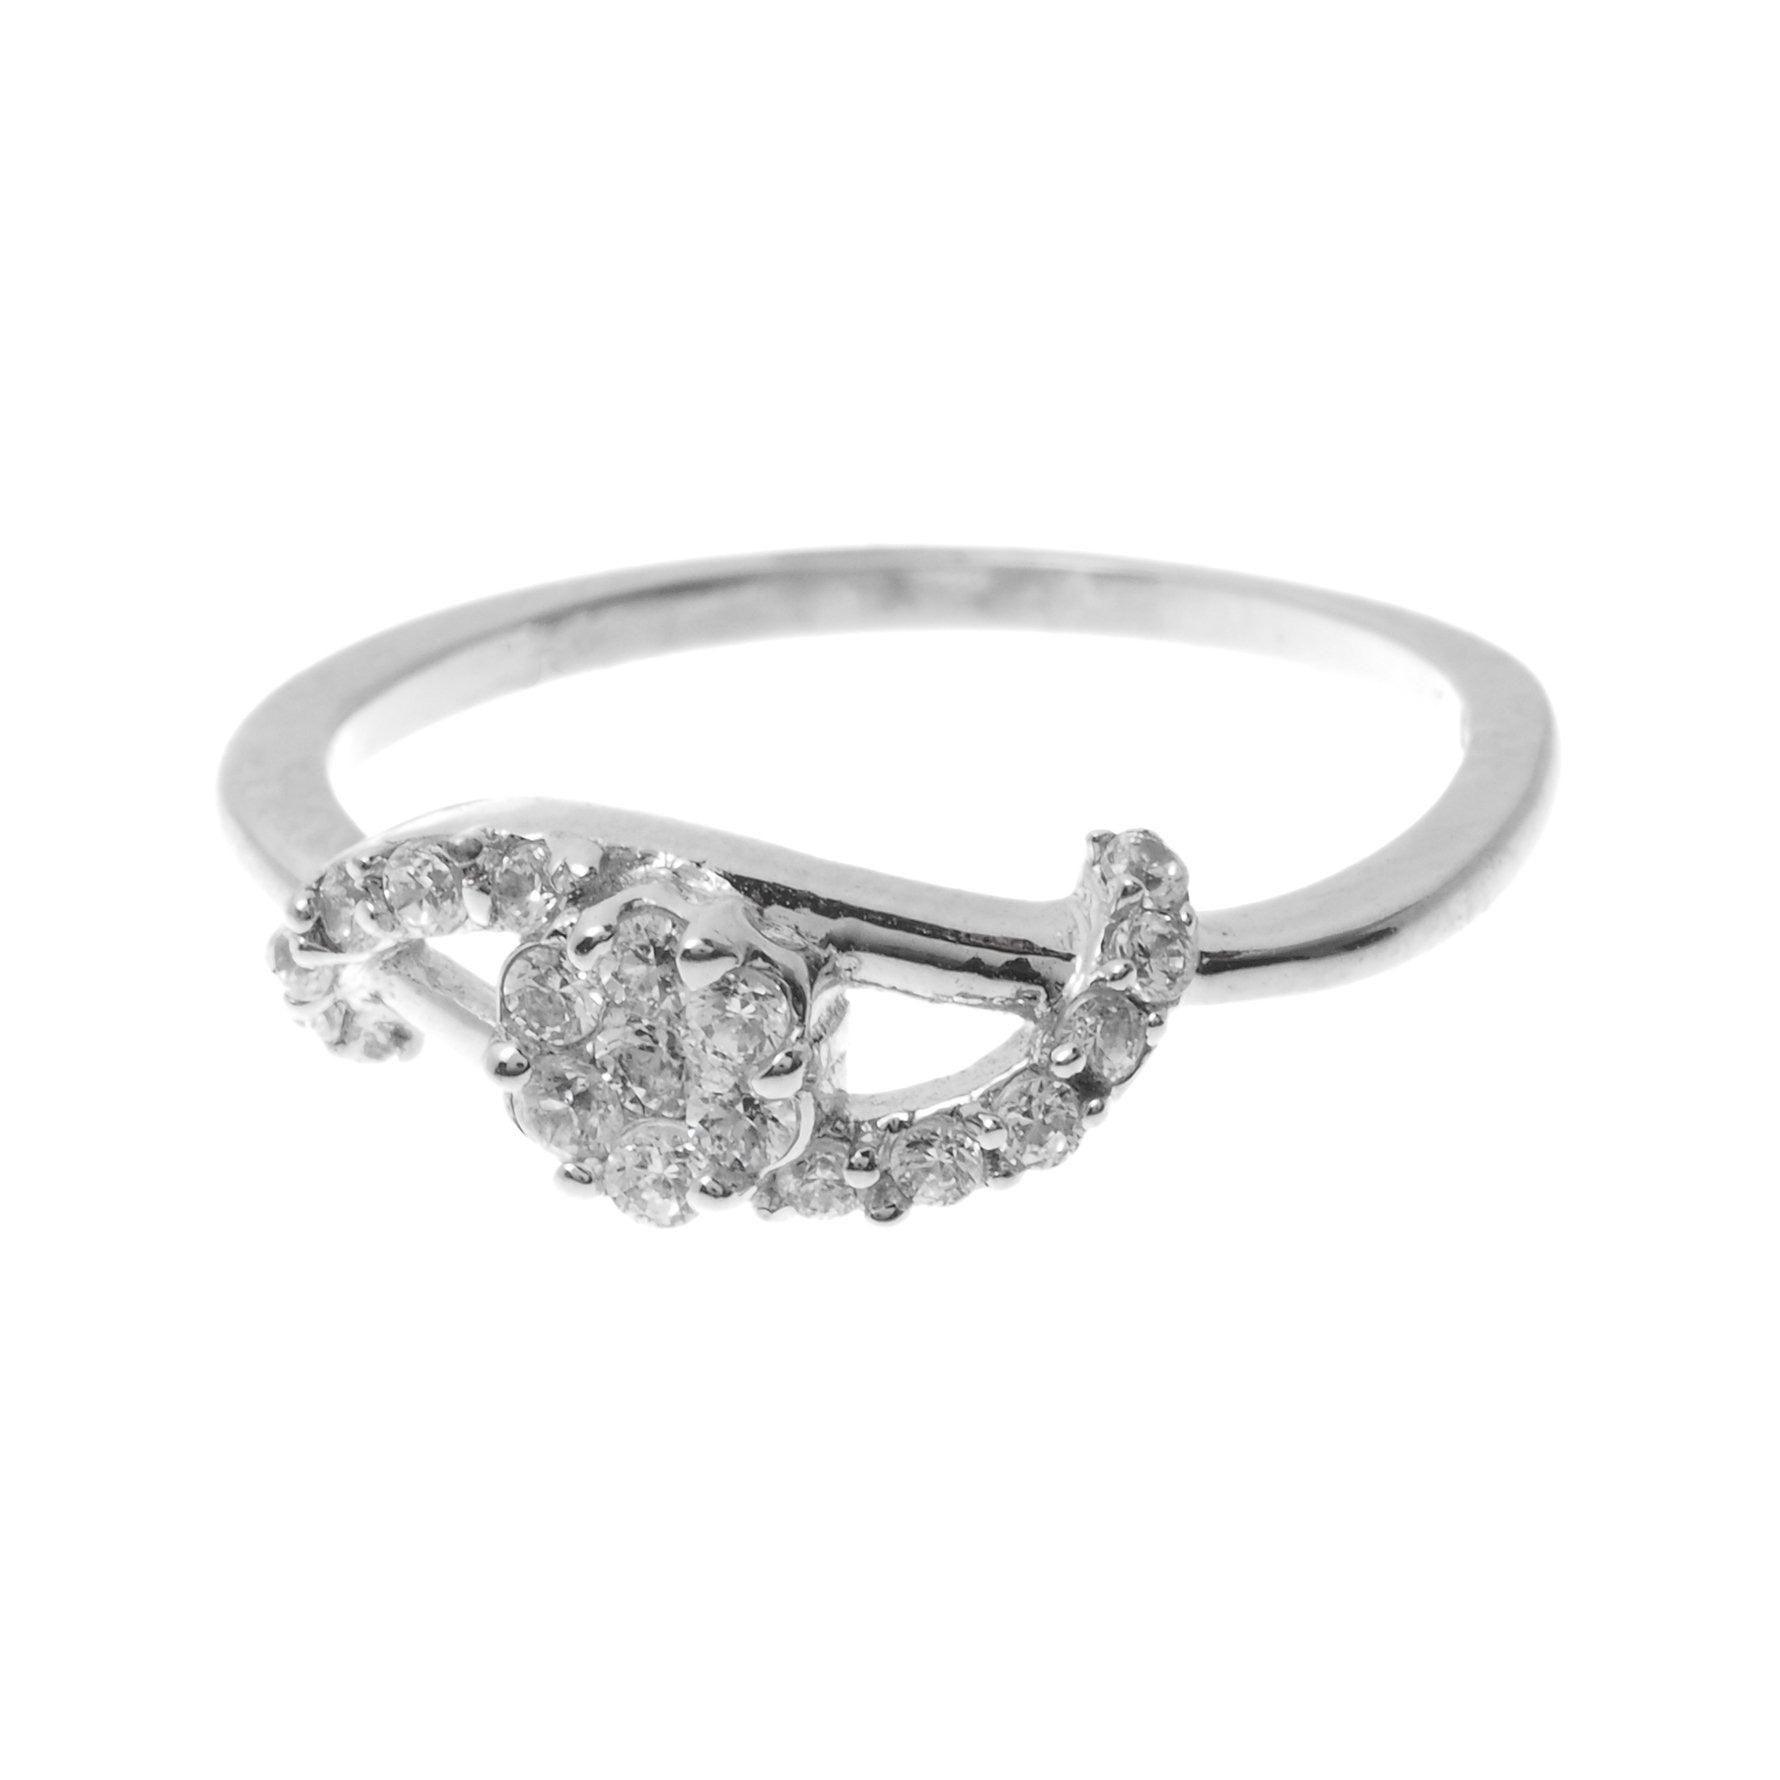 18ct White Gold Cubic Zirconia Engagement Ring LR1496 - Minar Jewellers